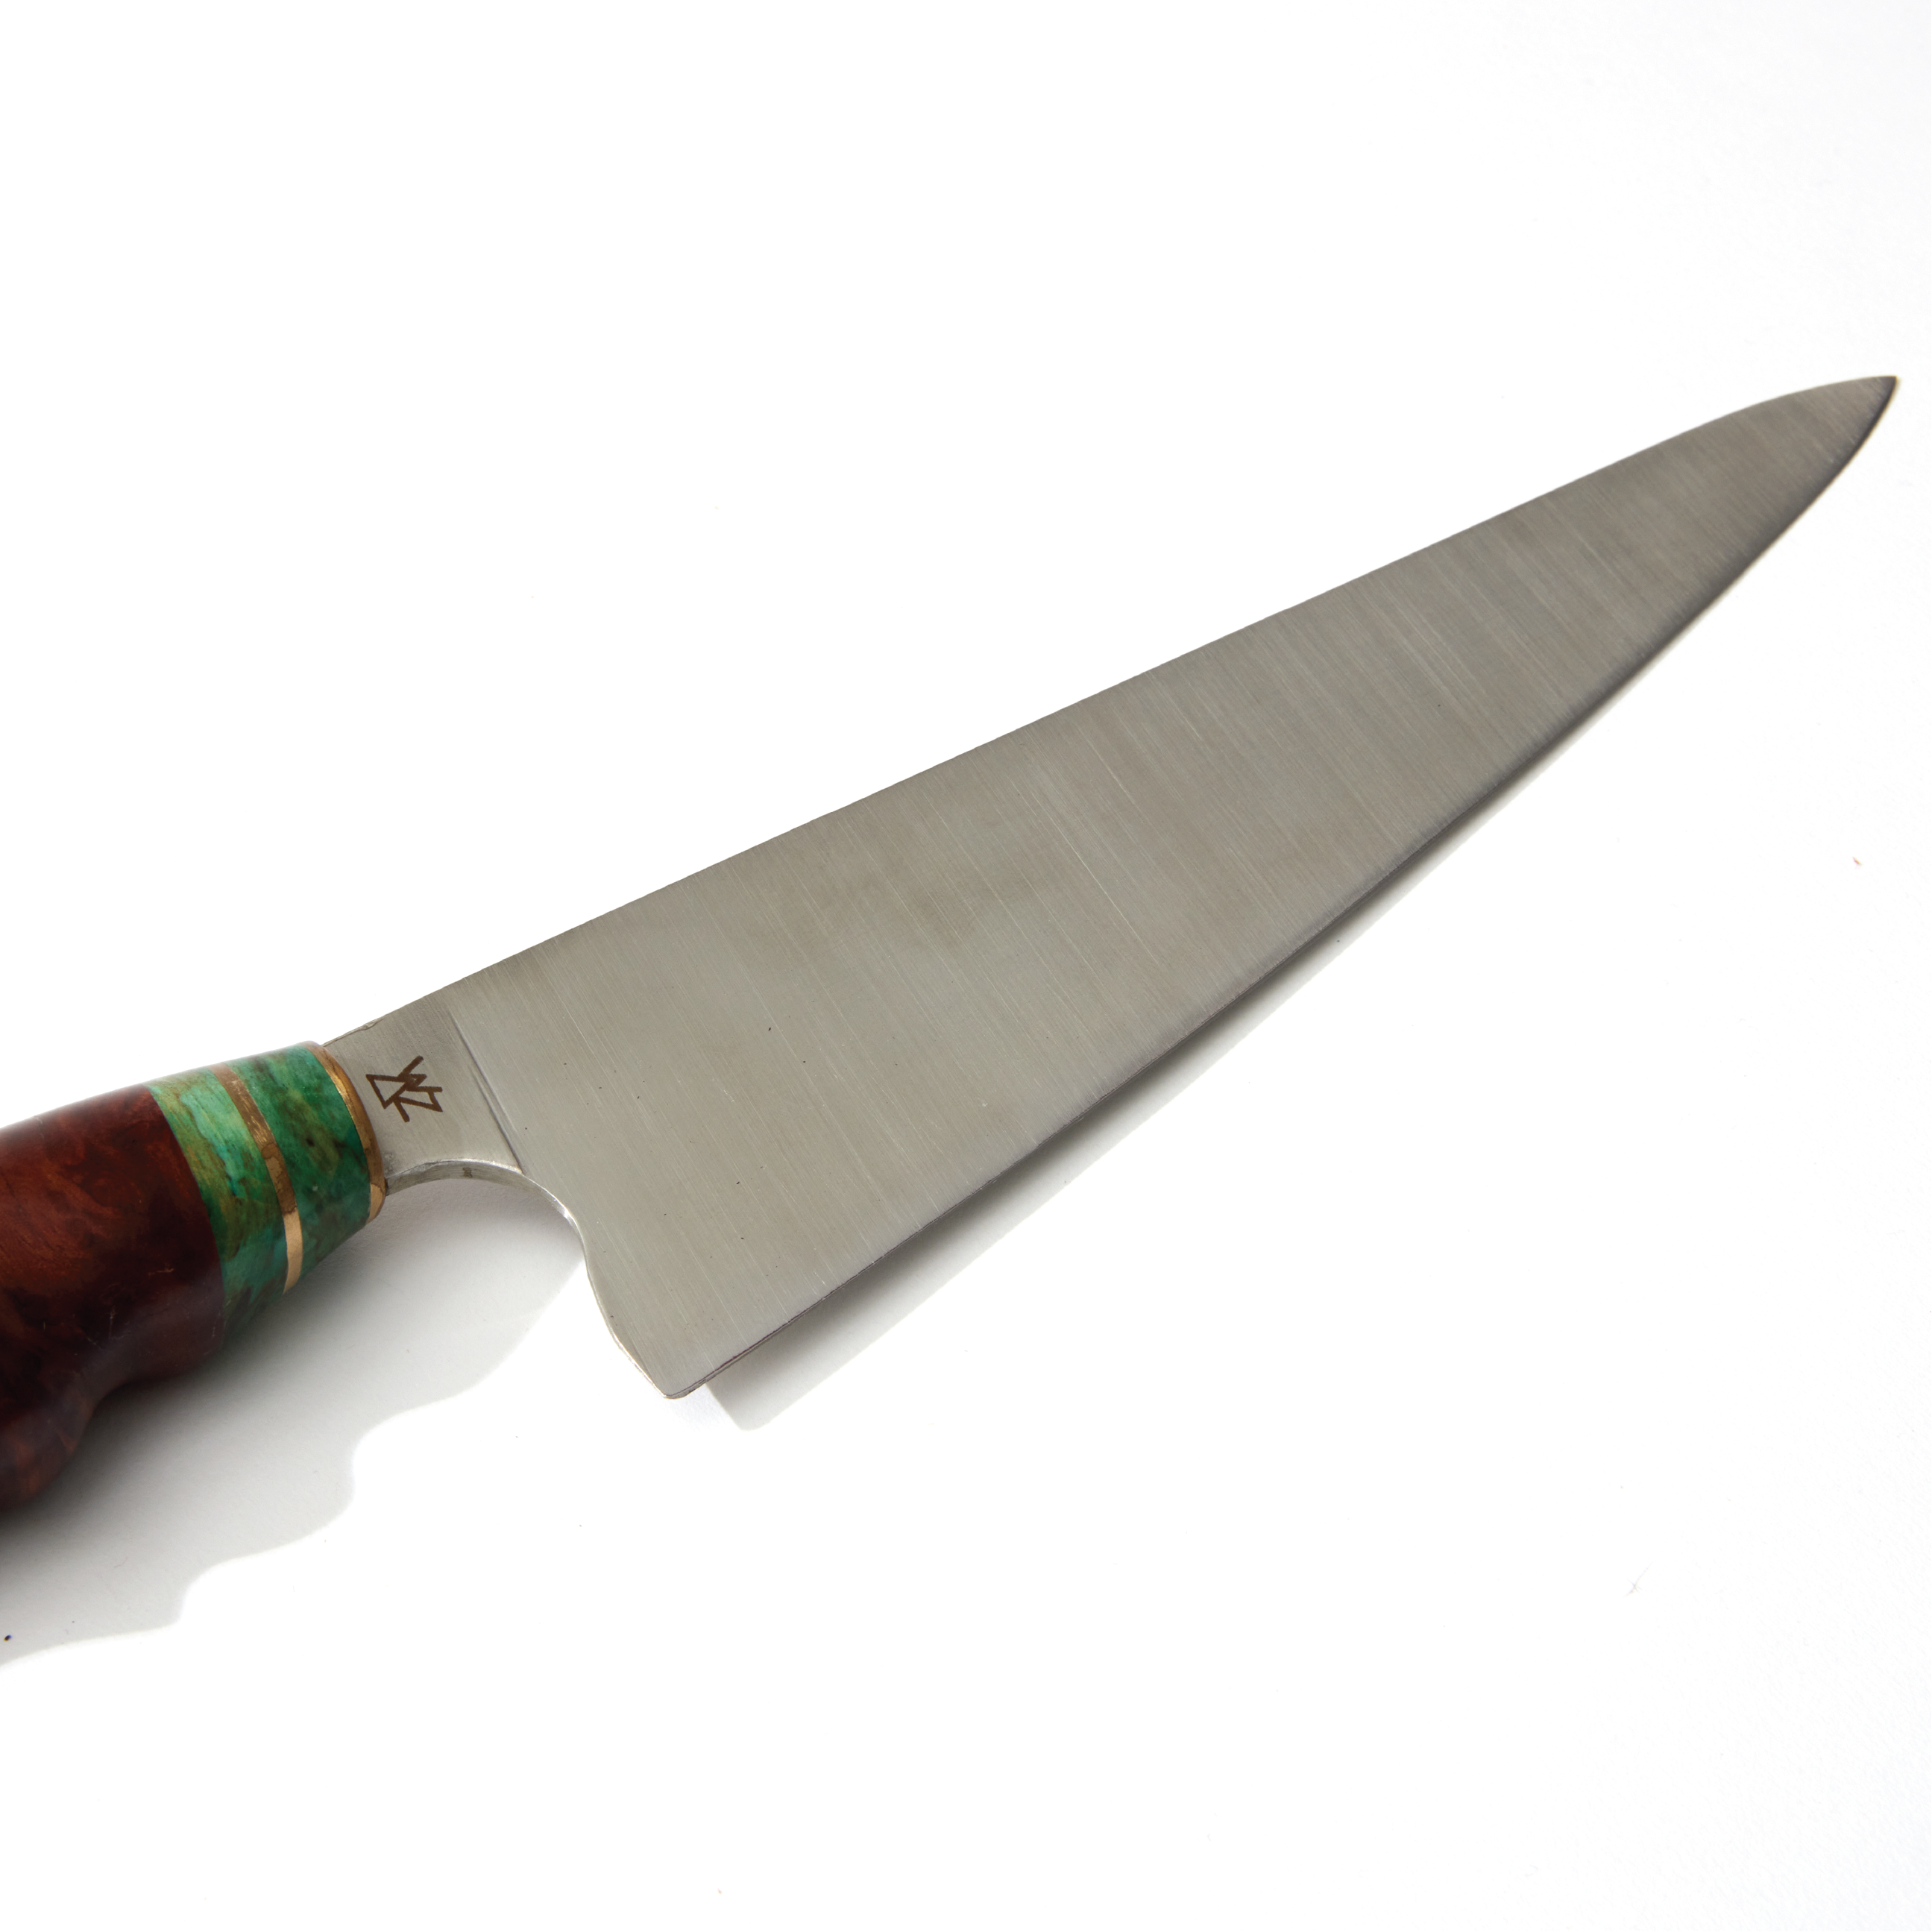 a large knife with a wooden handle on a white surface